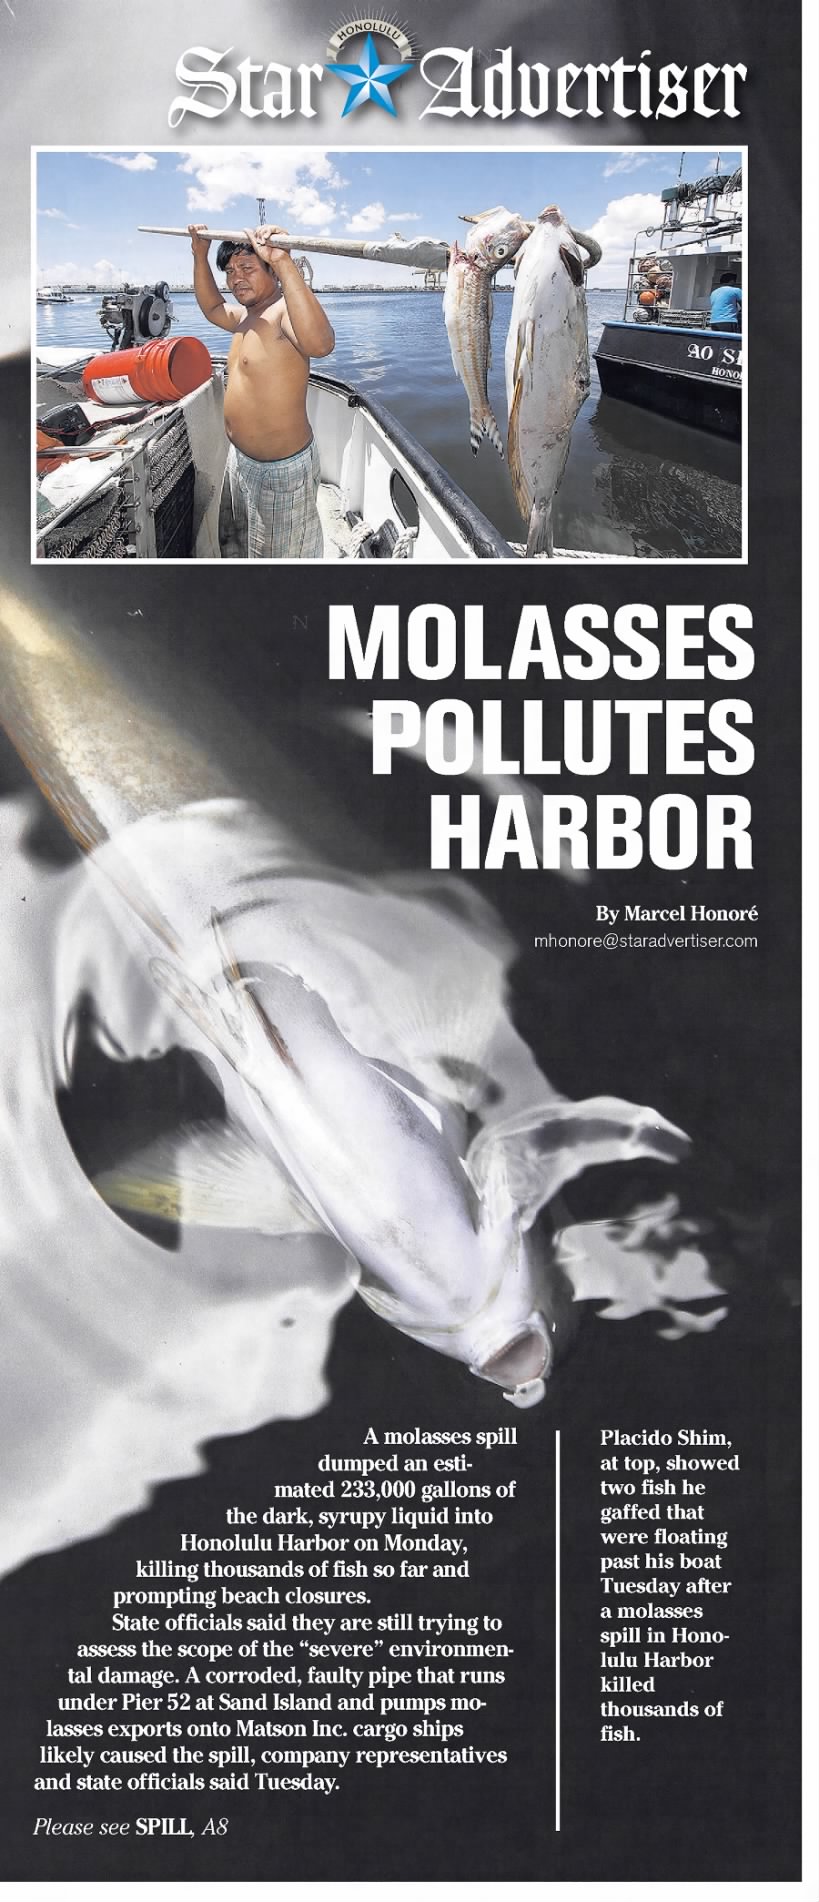 September 2013: Container ship spills 233,000 gallons of molasses into Honolulu Harbor